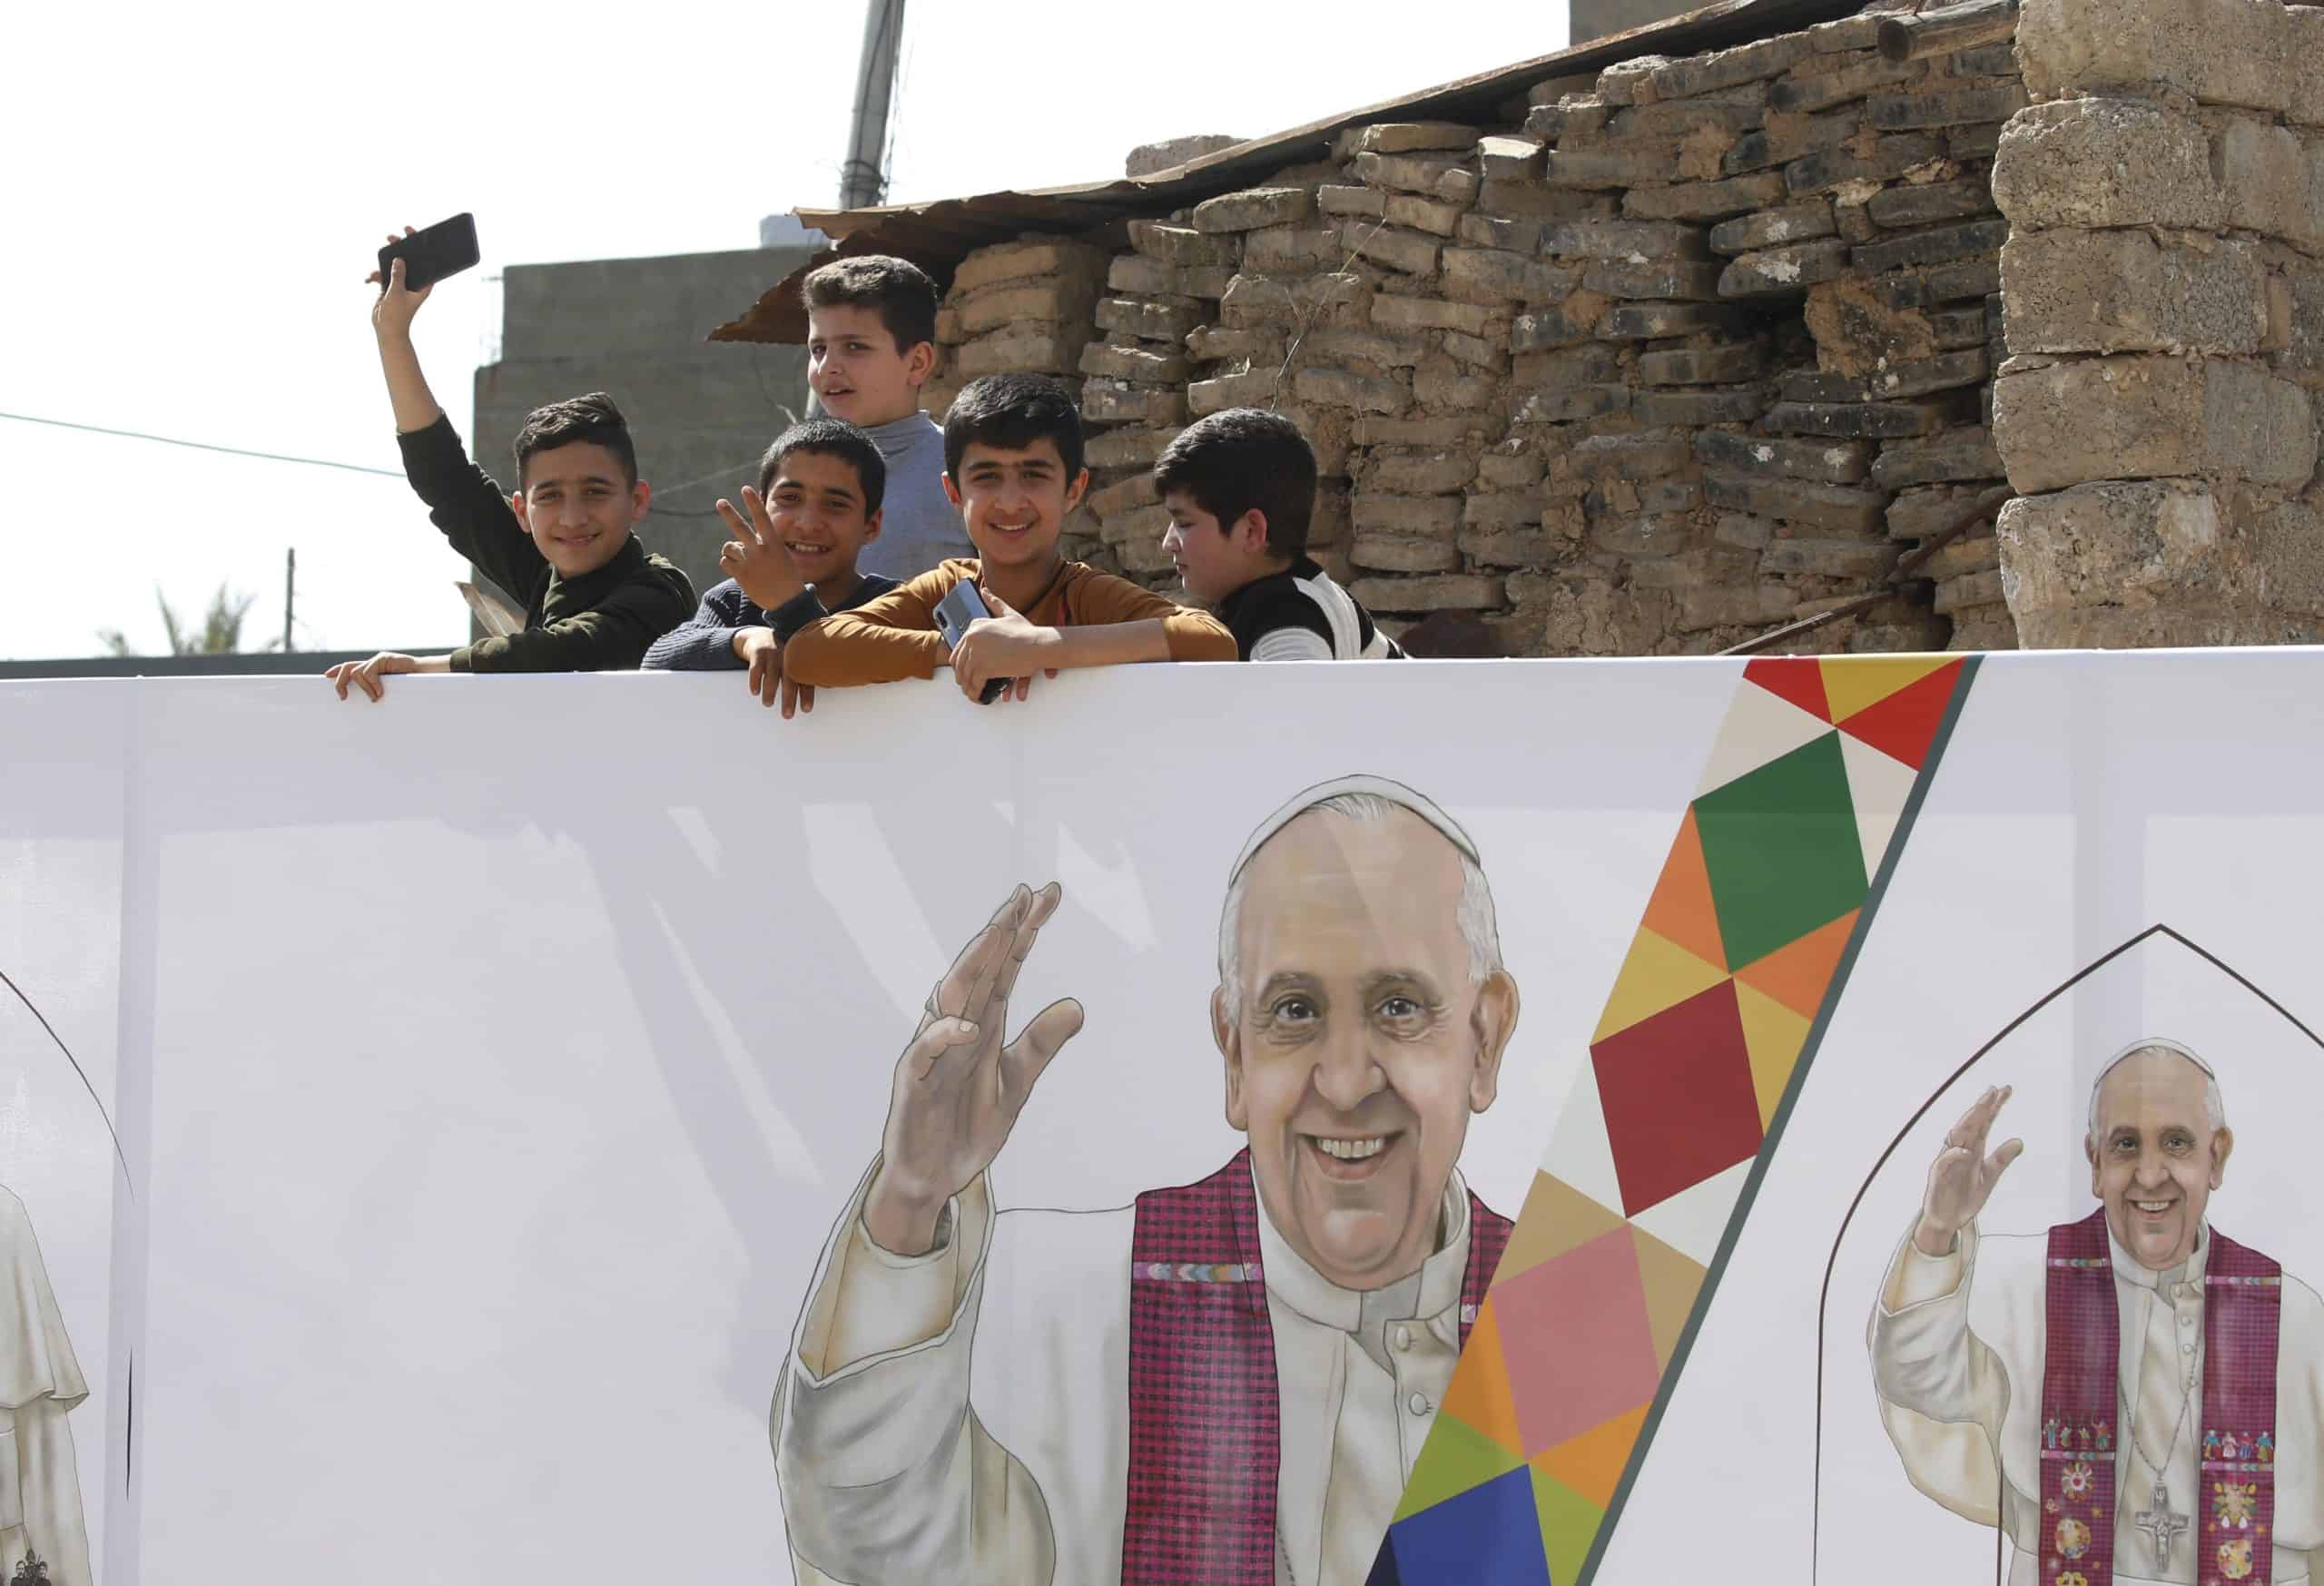 Pope Francis’ Visit to Iraq Highlights the Plight of Internally Displaced People